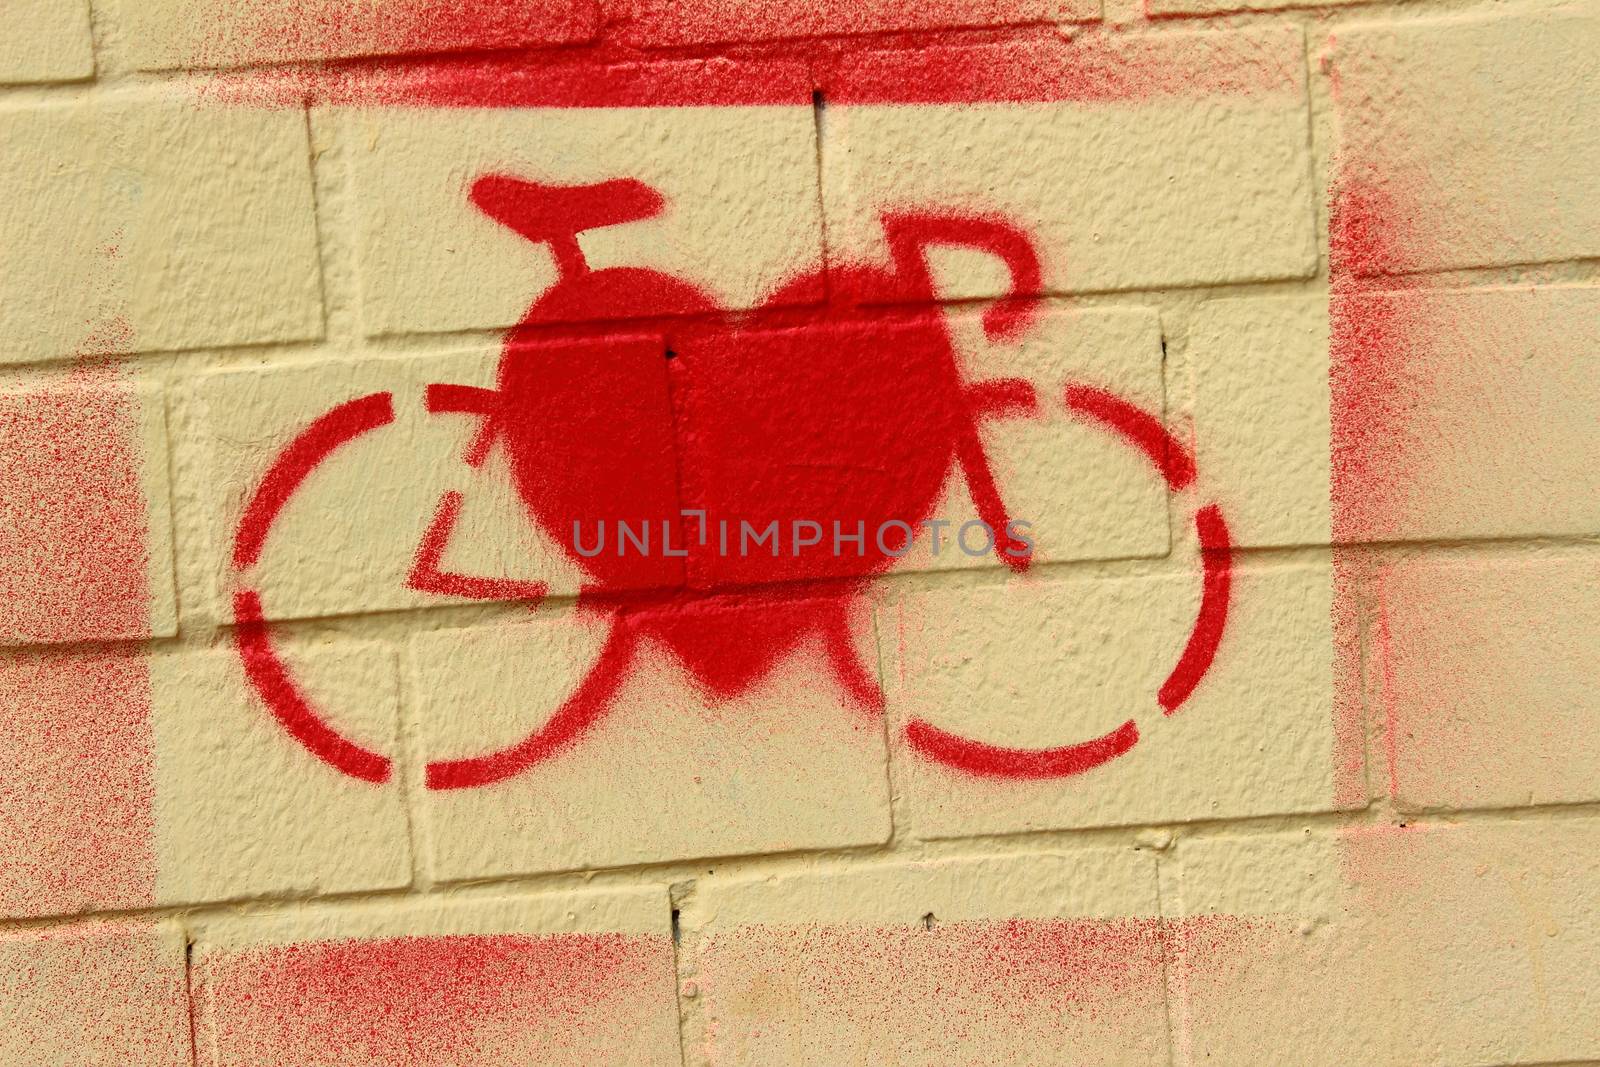 On the bright red paint wall painted bike and heart